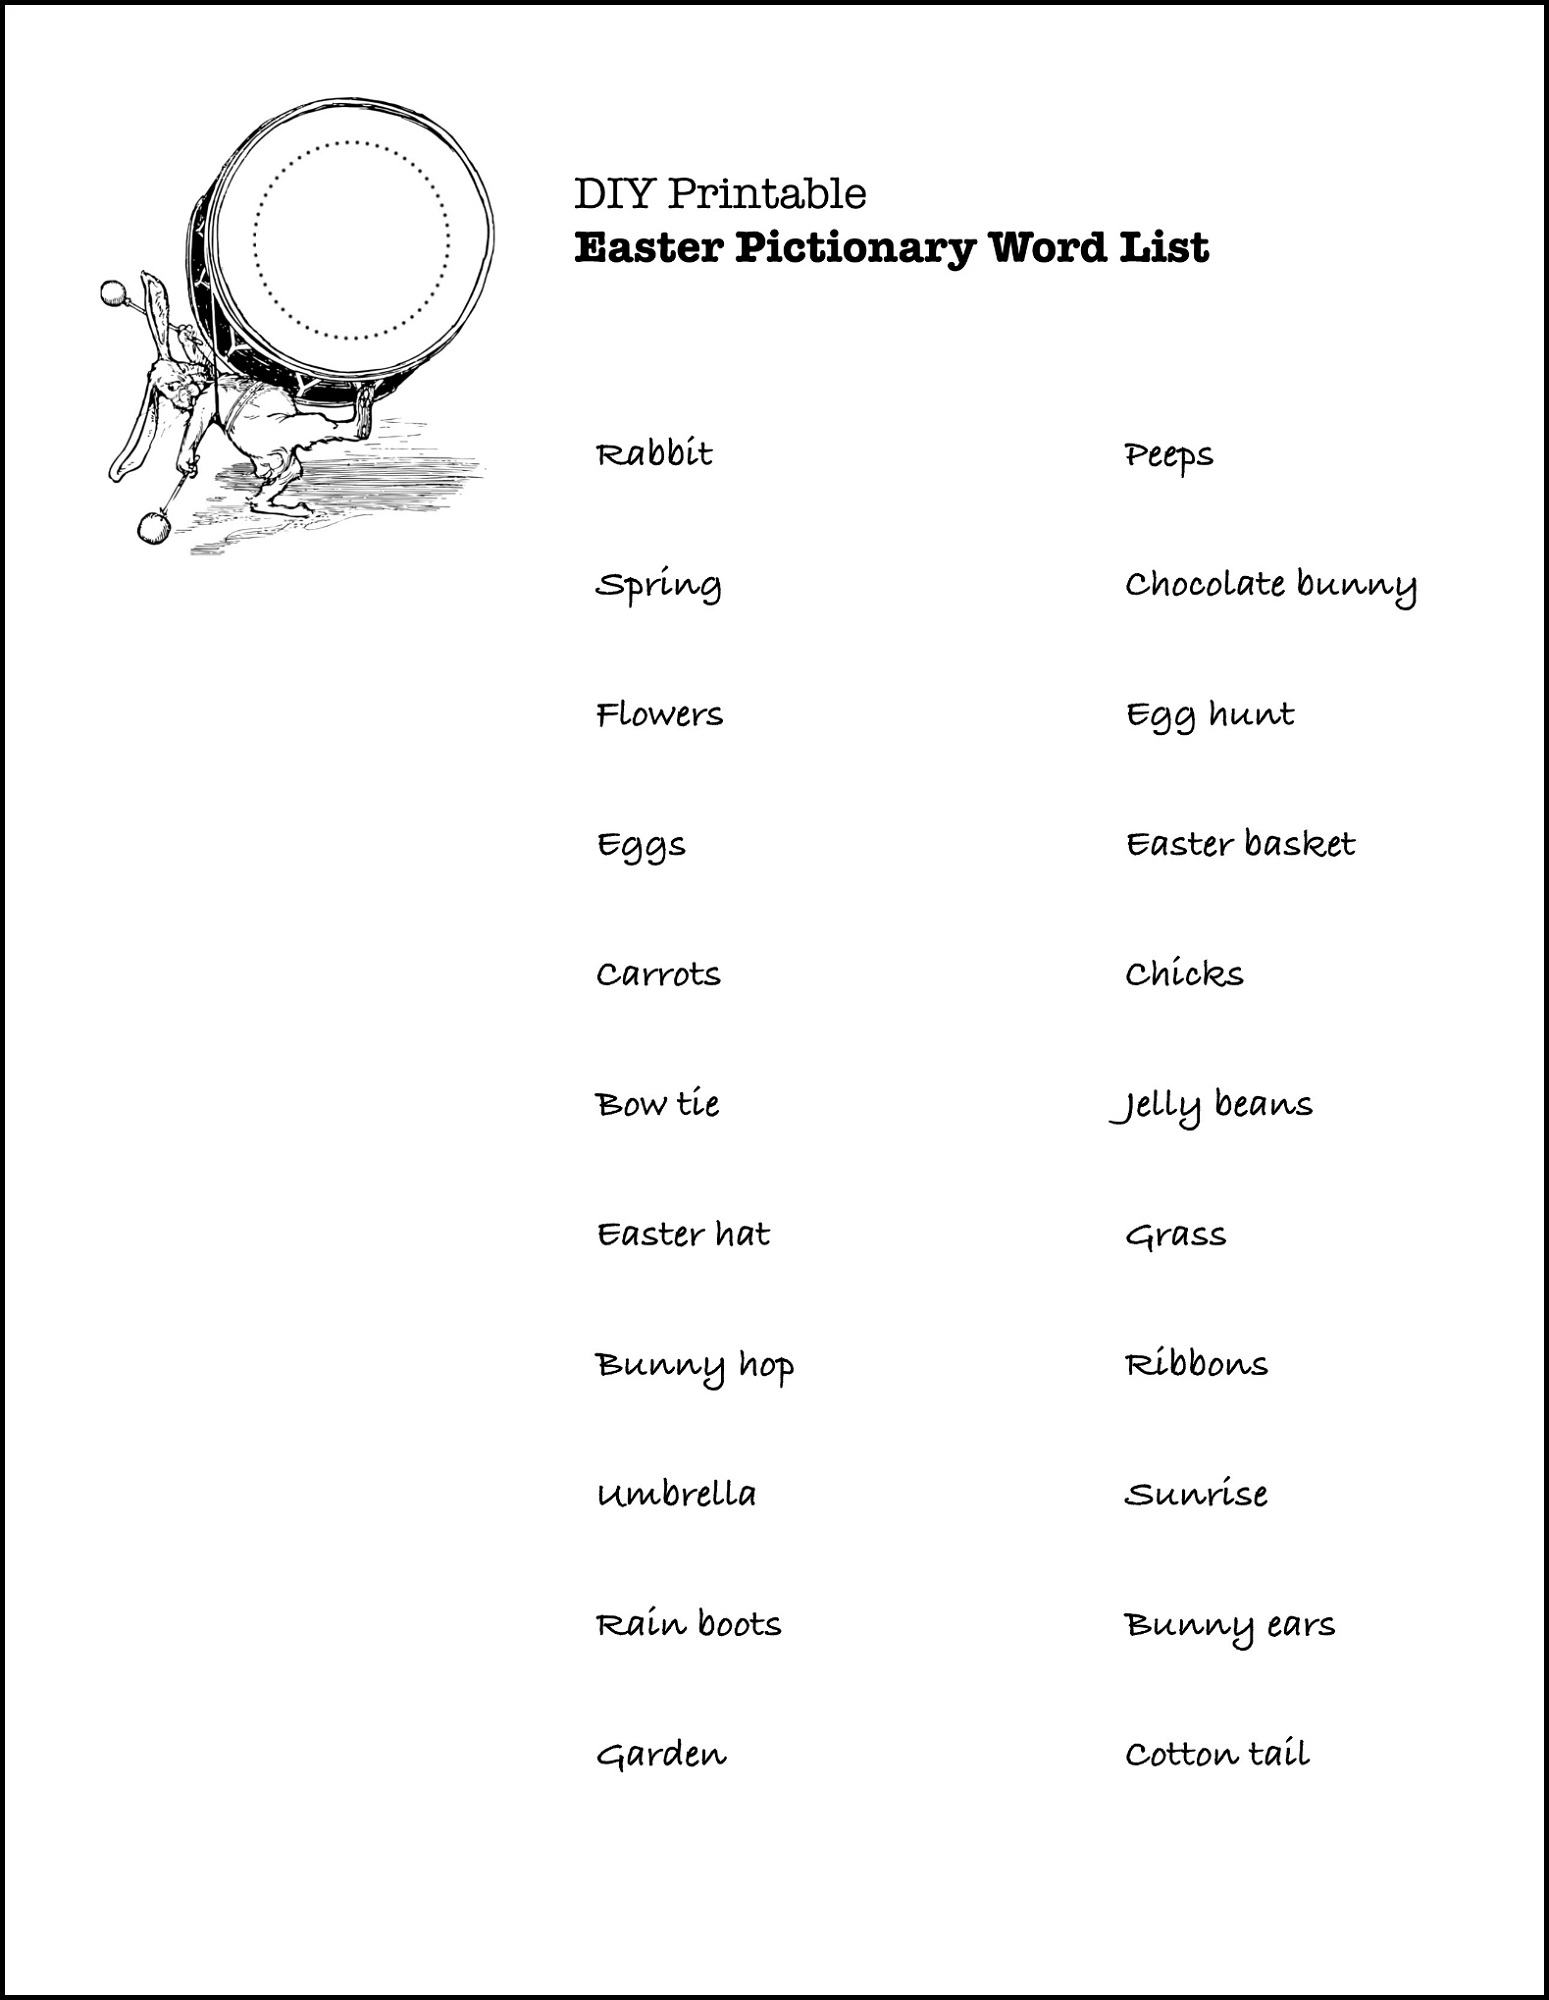 printable-pictionary-words-customize-and-print